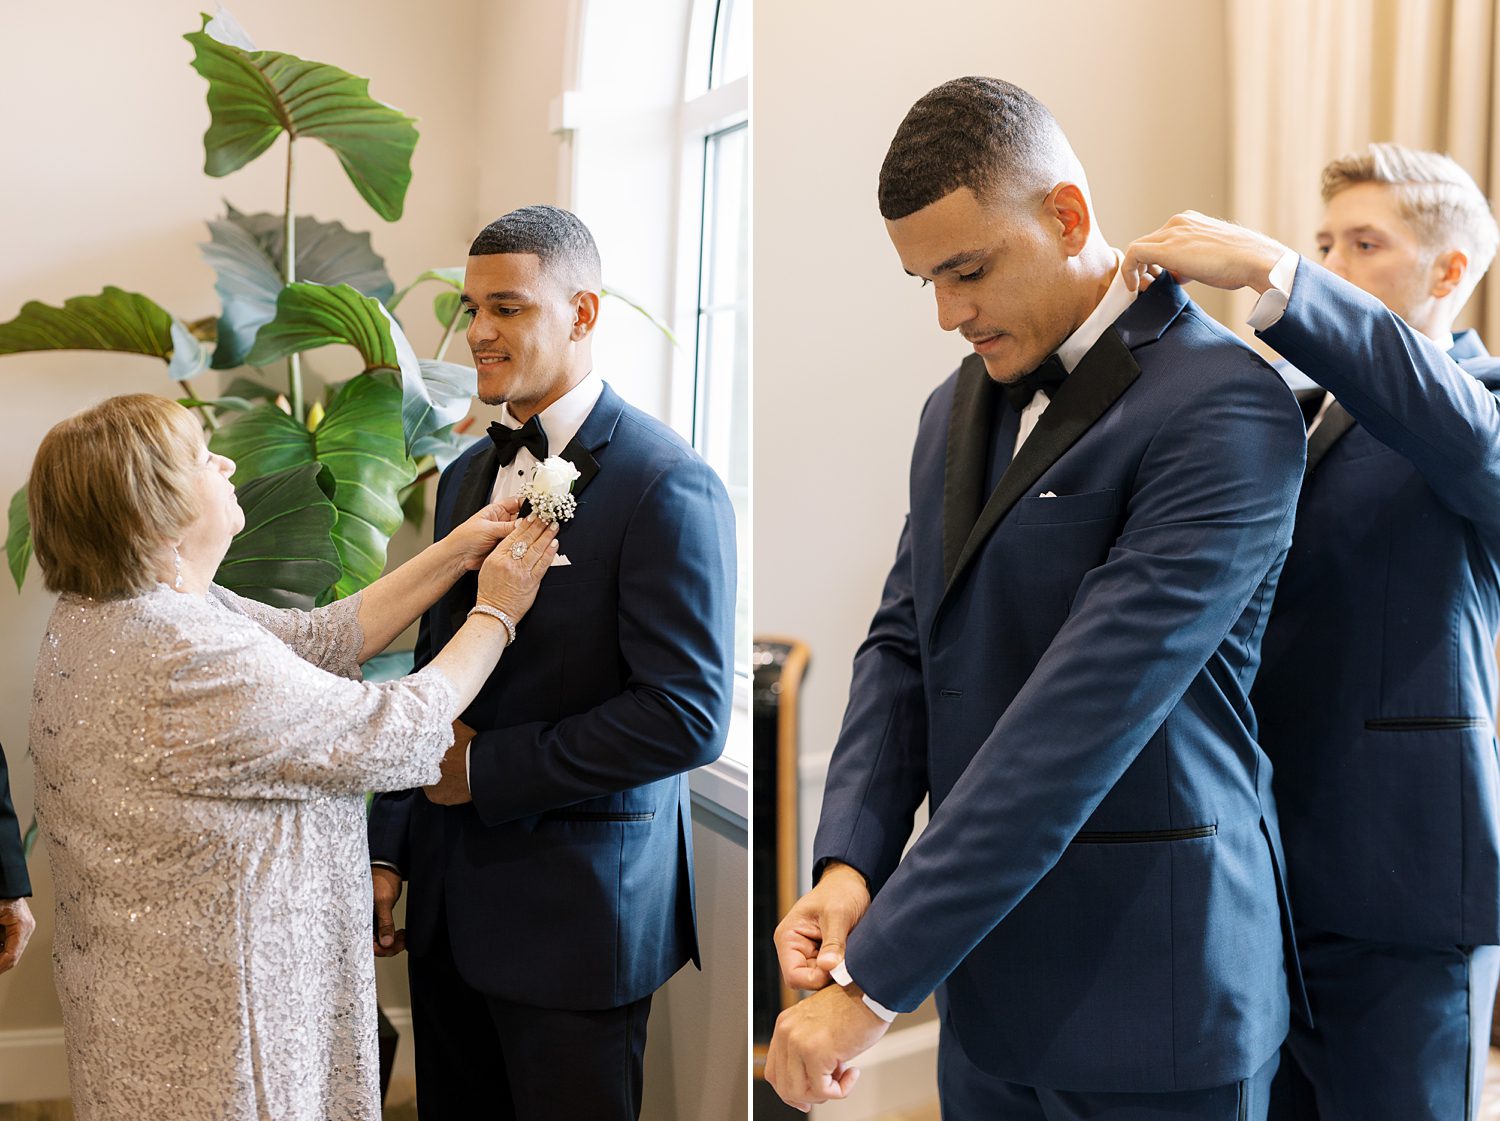 groom's mother and father help groom with tie and lapel of suit 